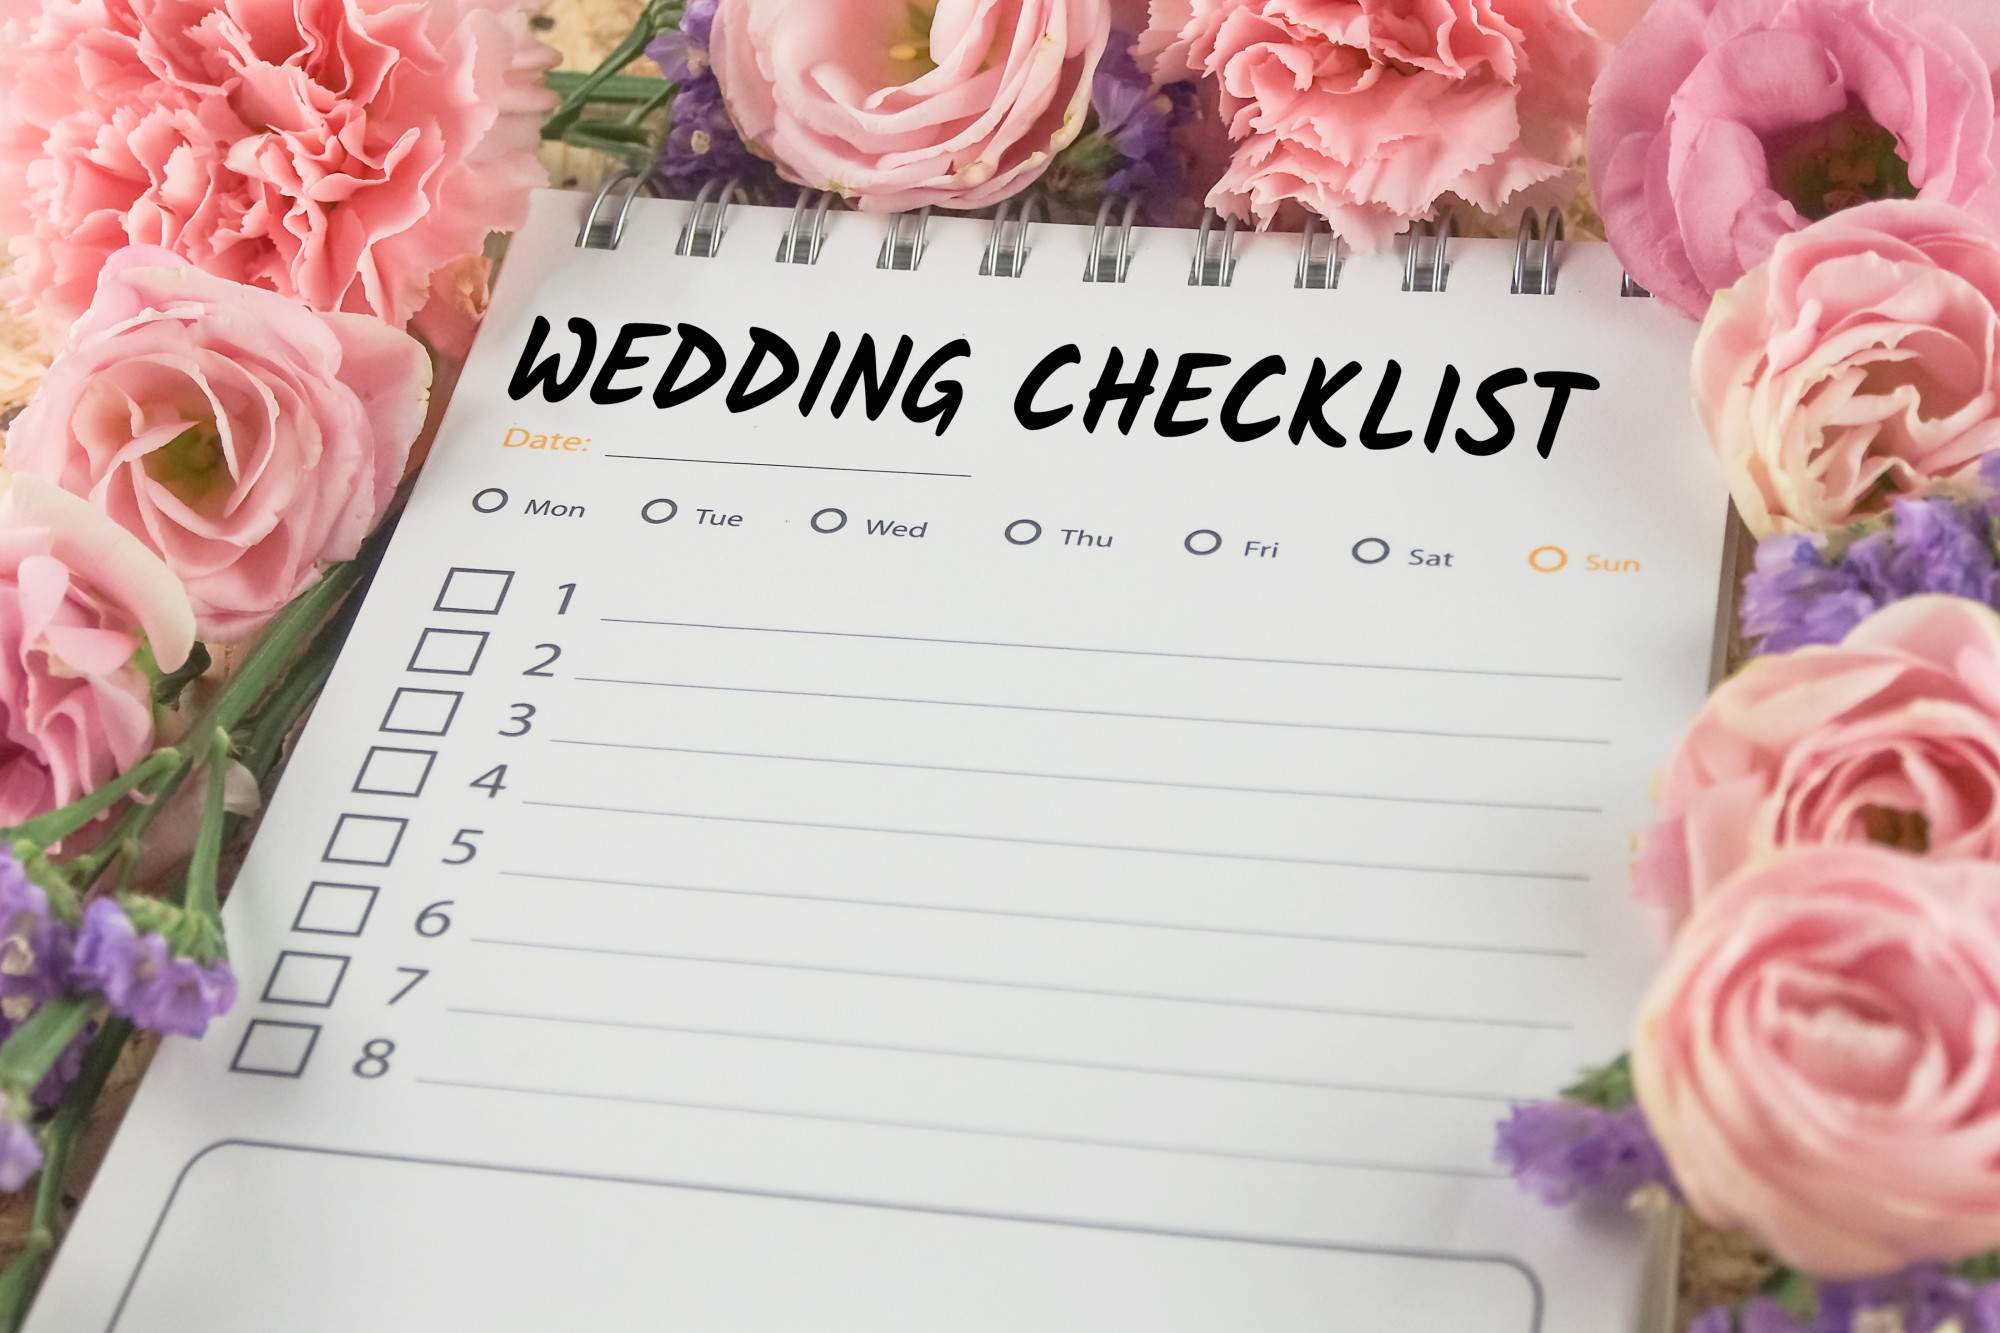 A Quick and Simple Wedding Day Checklist